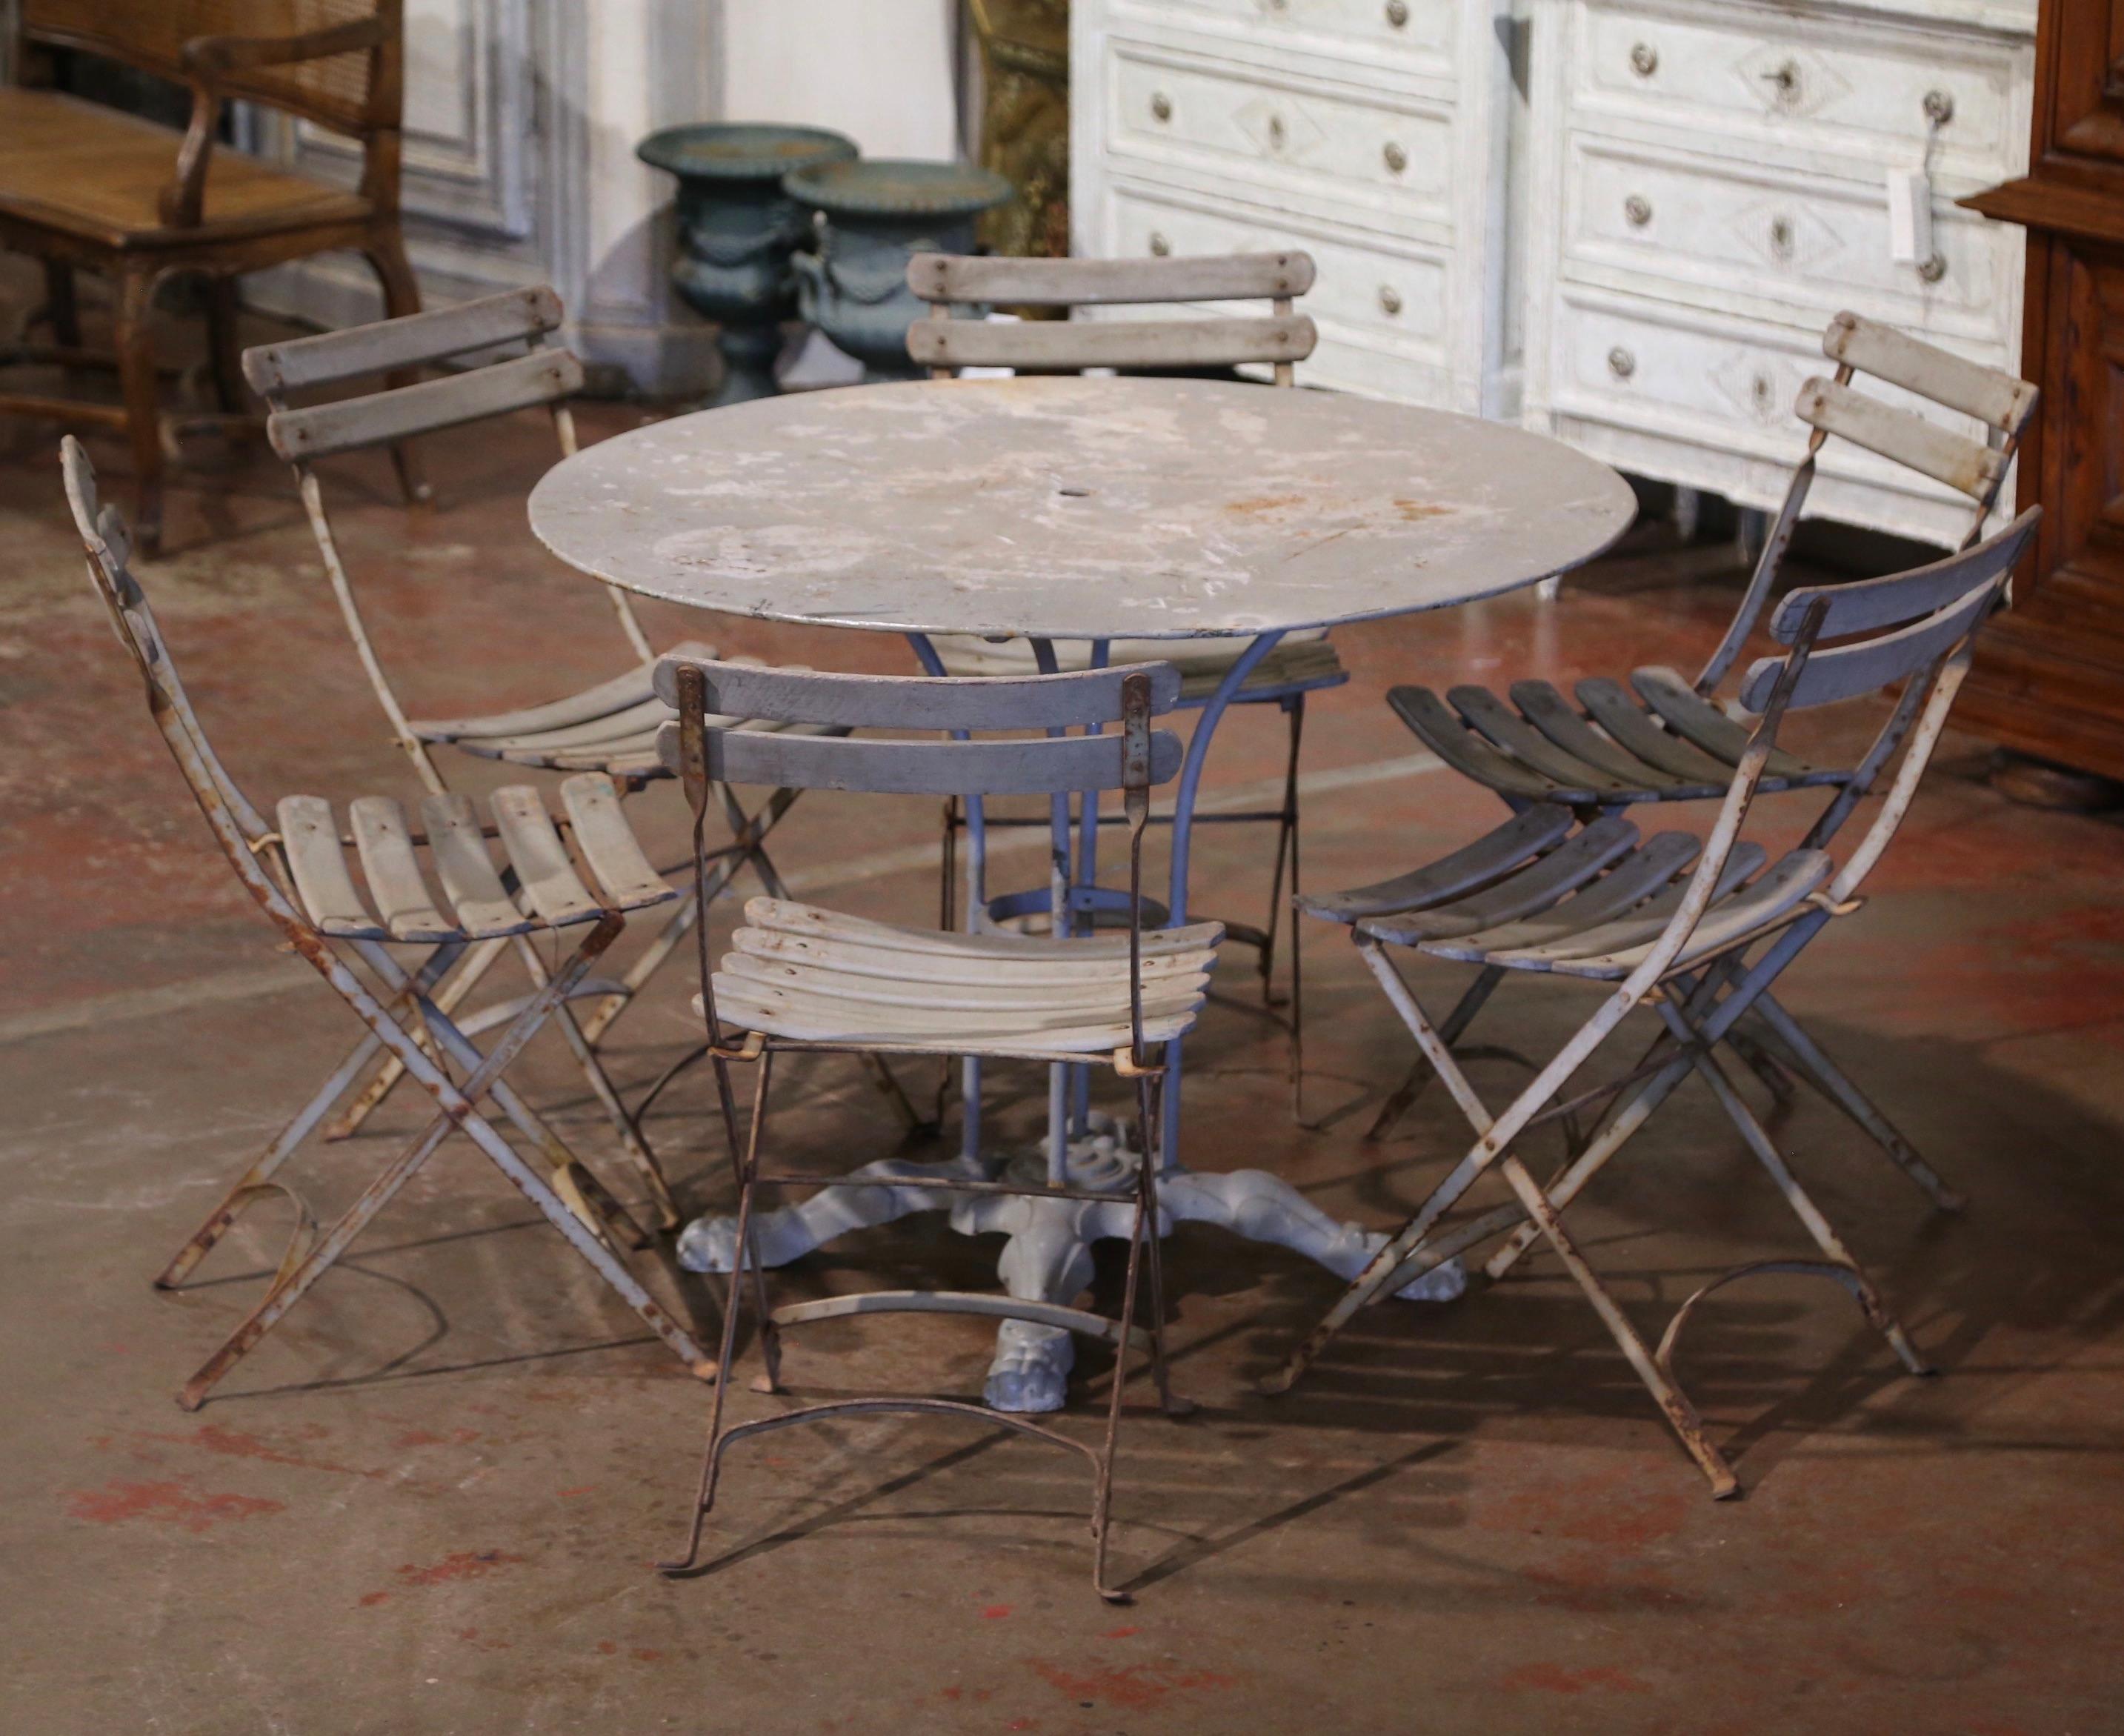 Hand-Crafted Early 20th Century French Painted Iron Outdoor Garden Table and Set of 6 Chairs